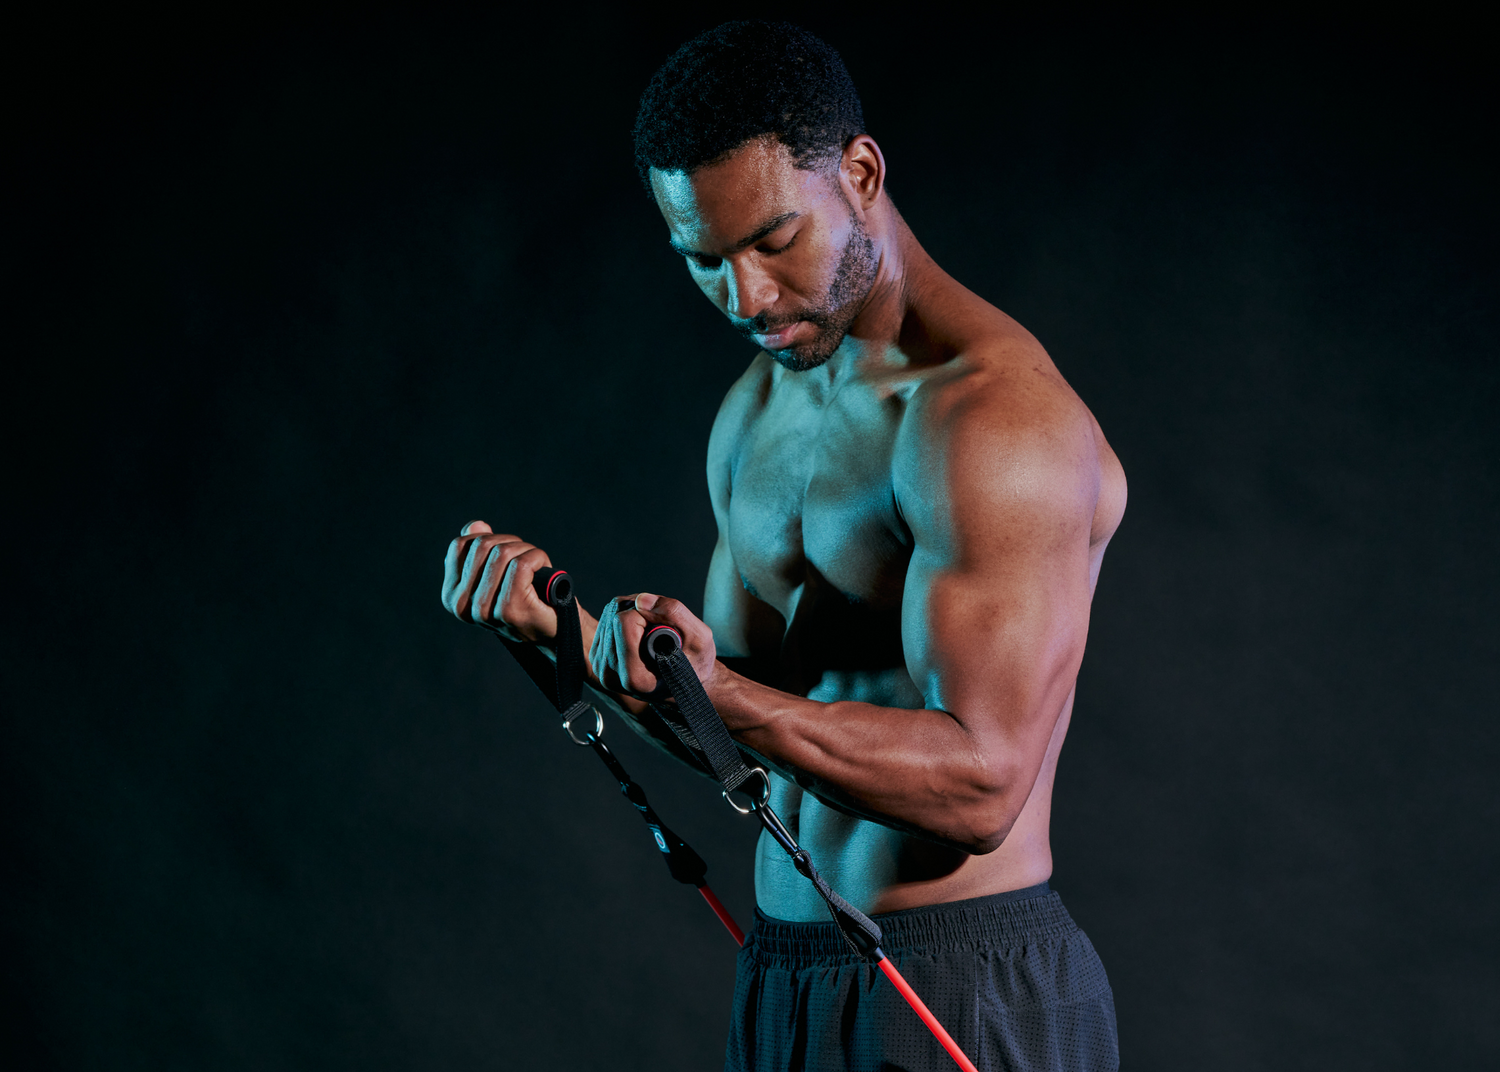 7 New Approaches to the Best Shoulder Workout - Shoulders Workout